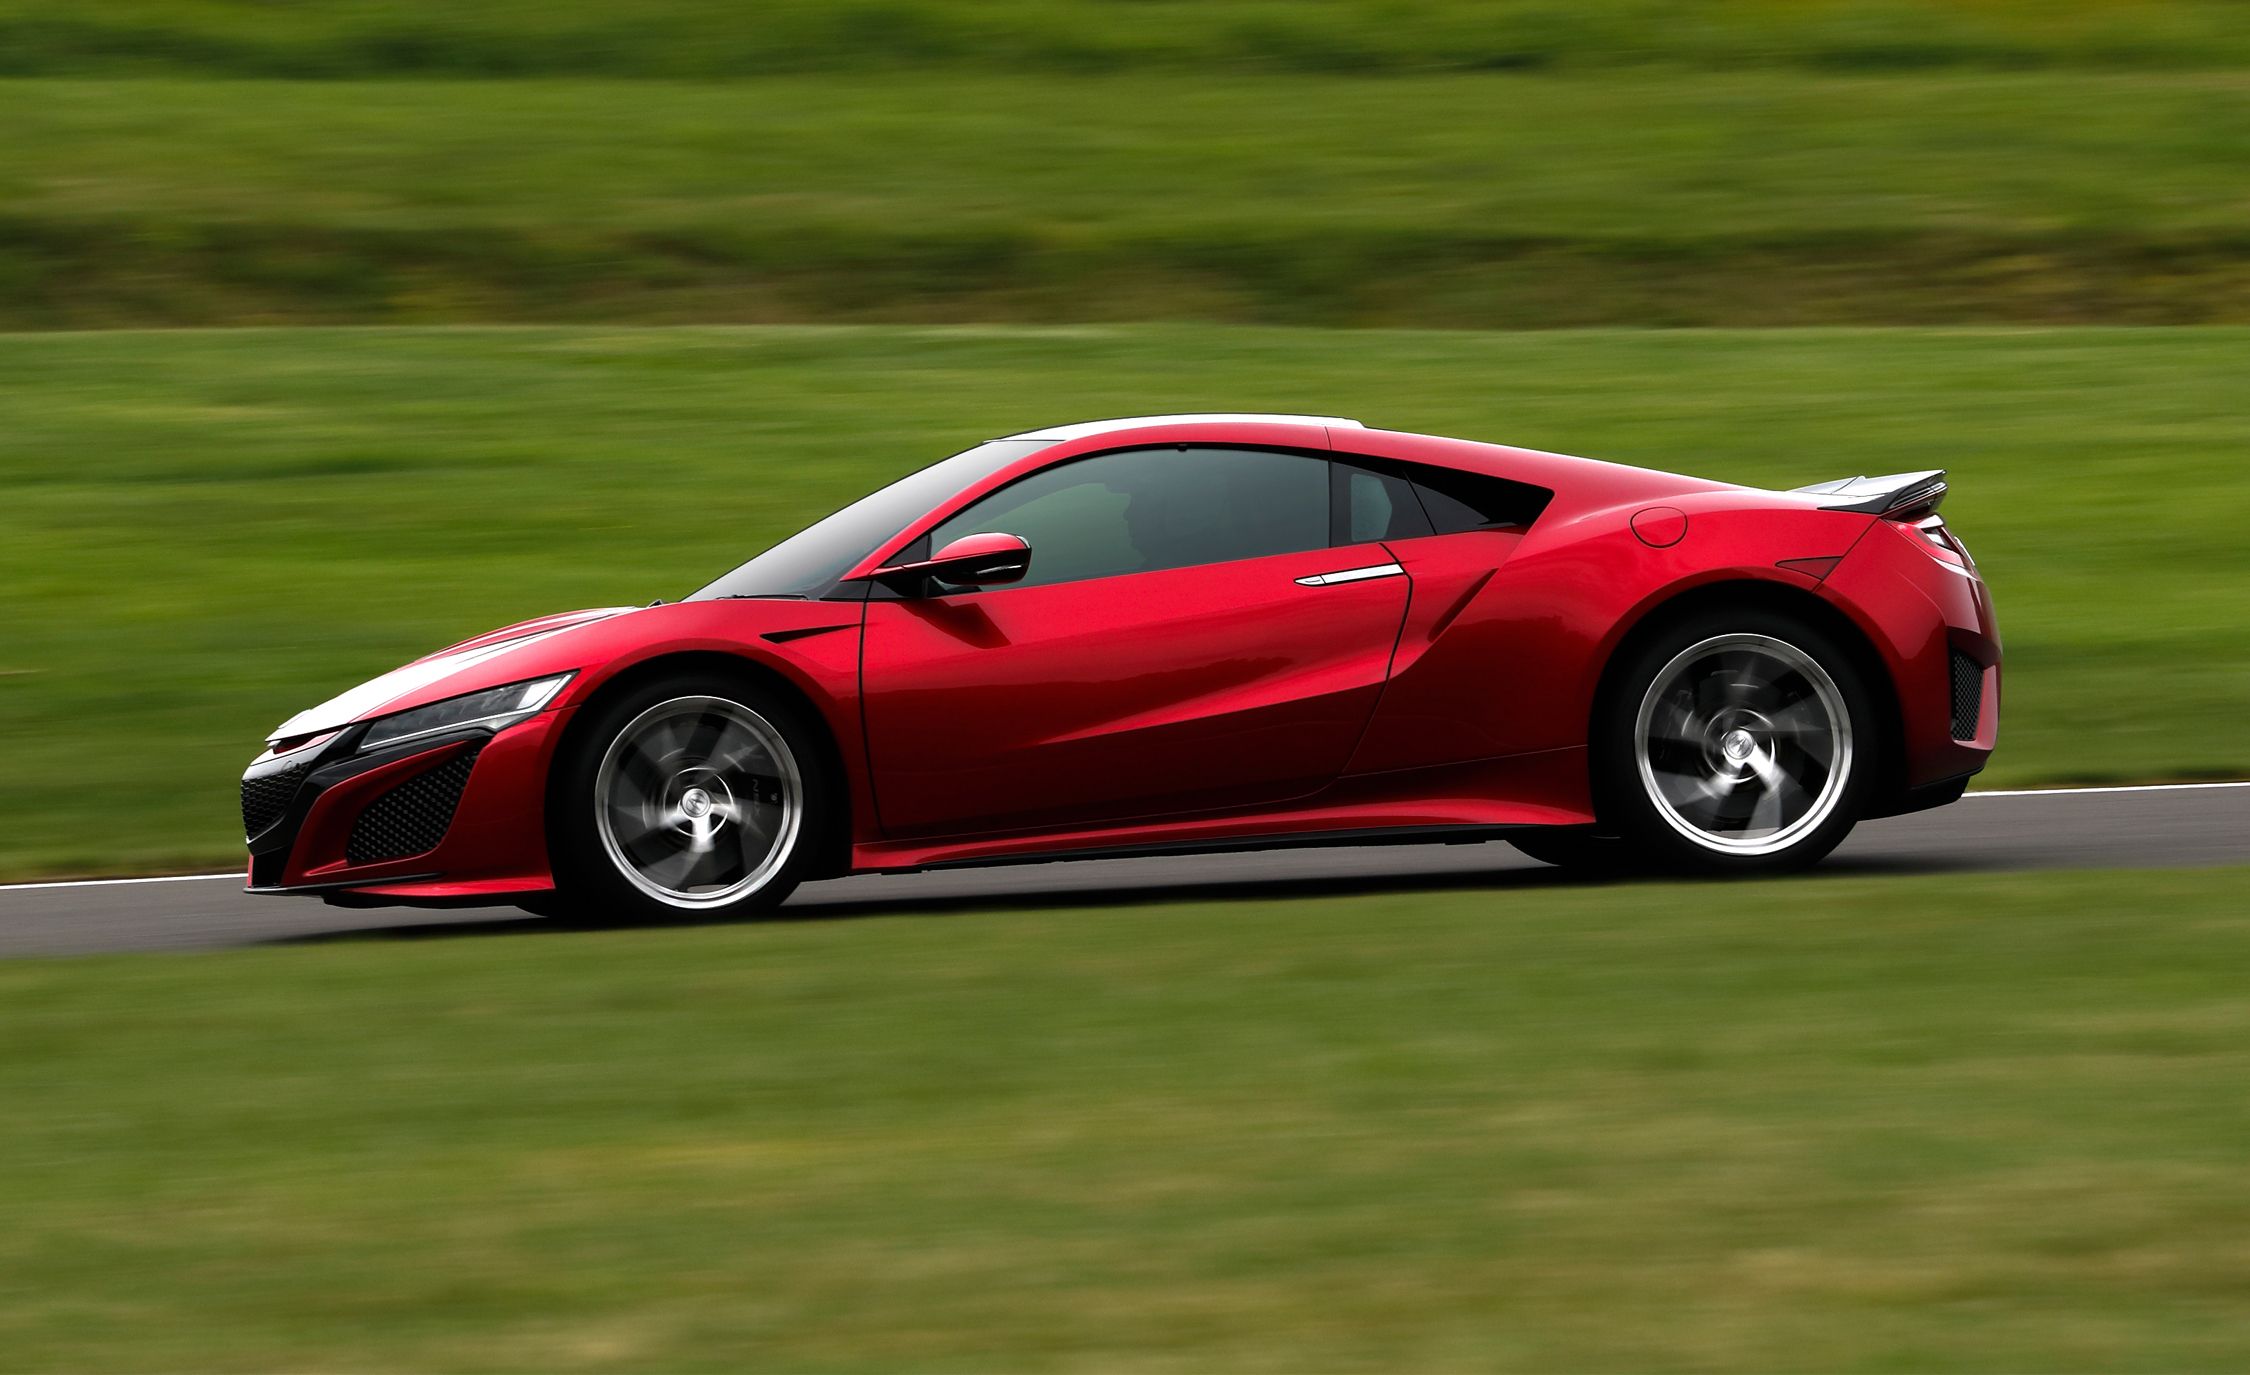 19 Acura Nsx A Hybrid Supercar With Manners